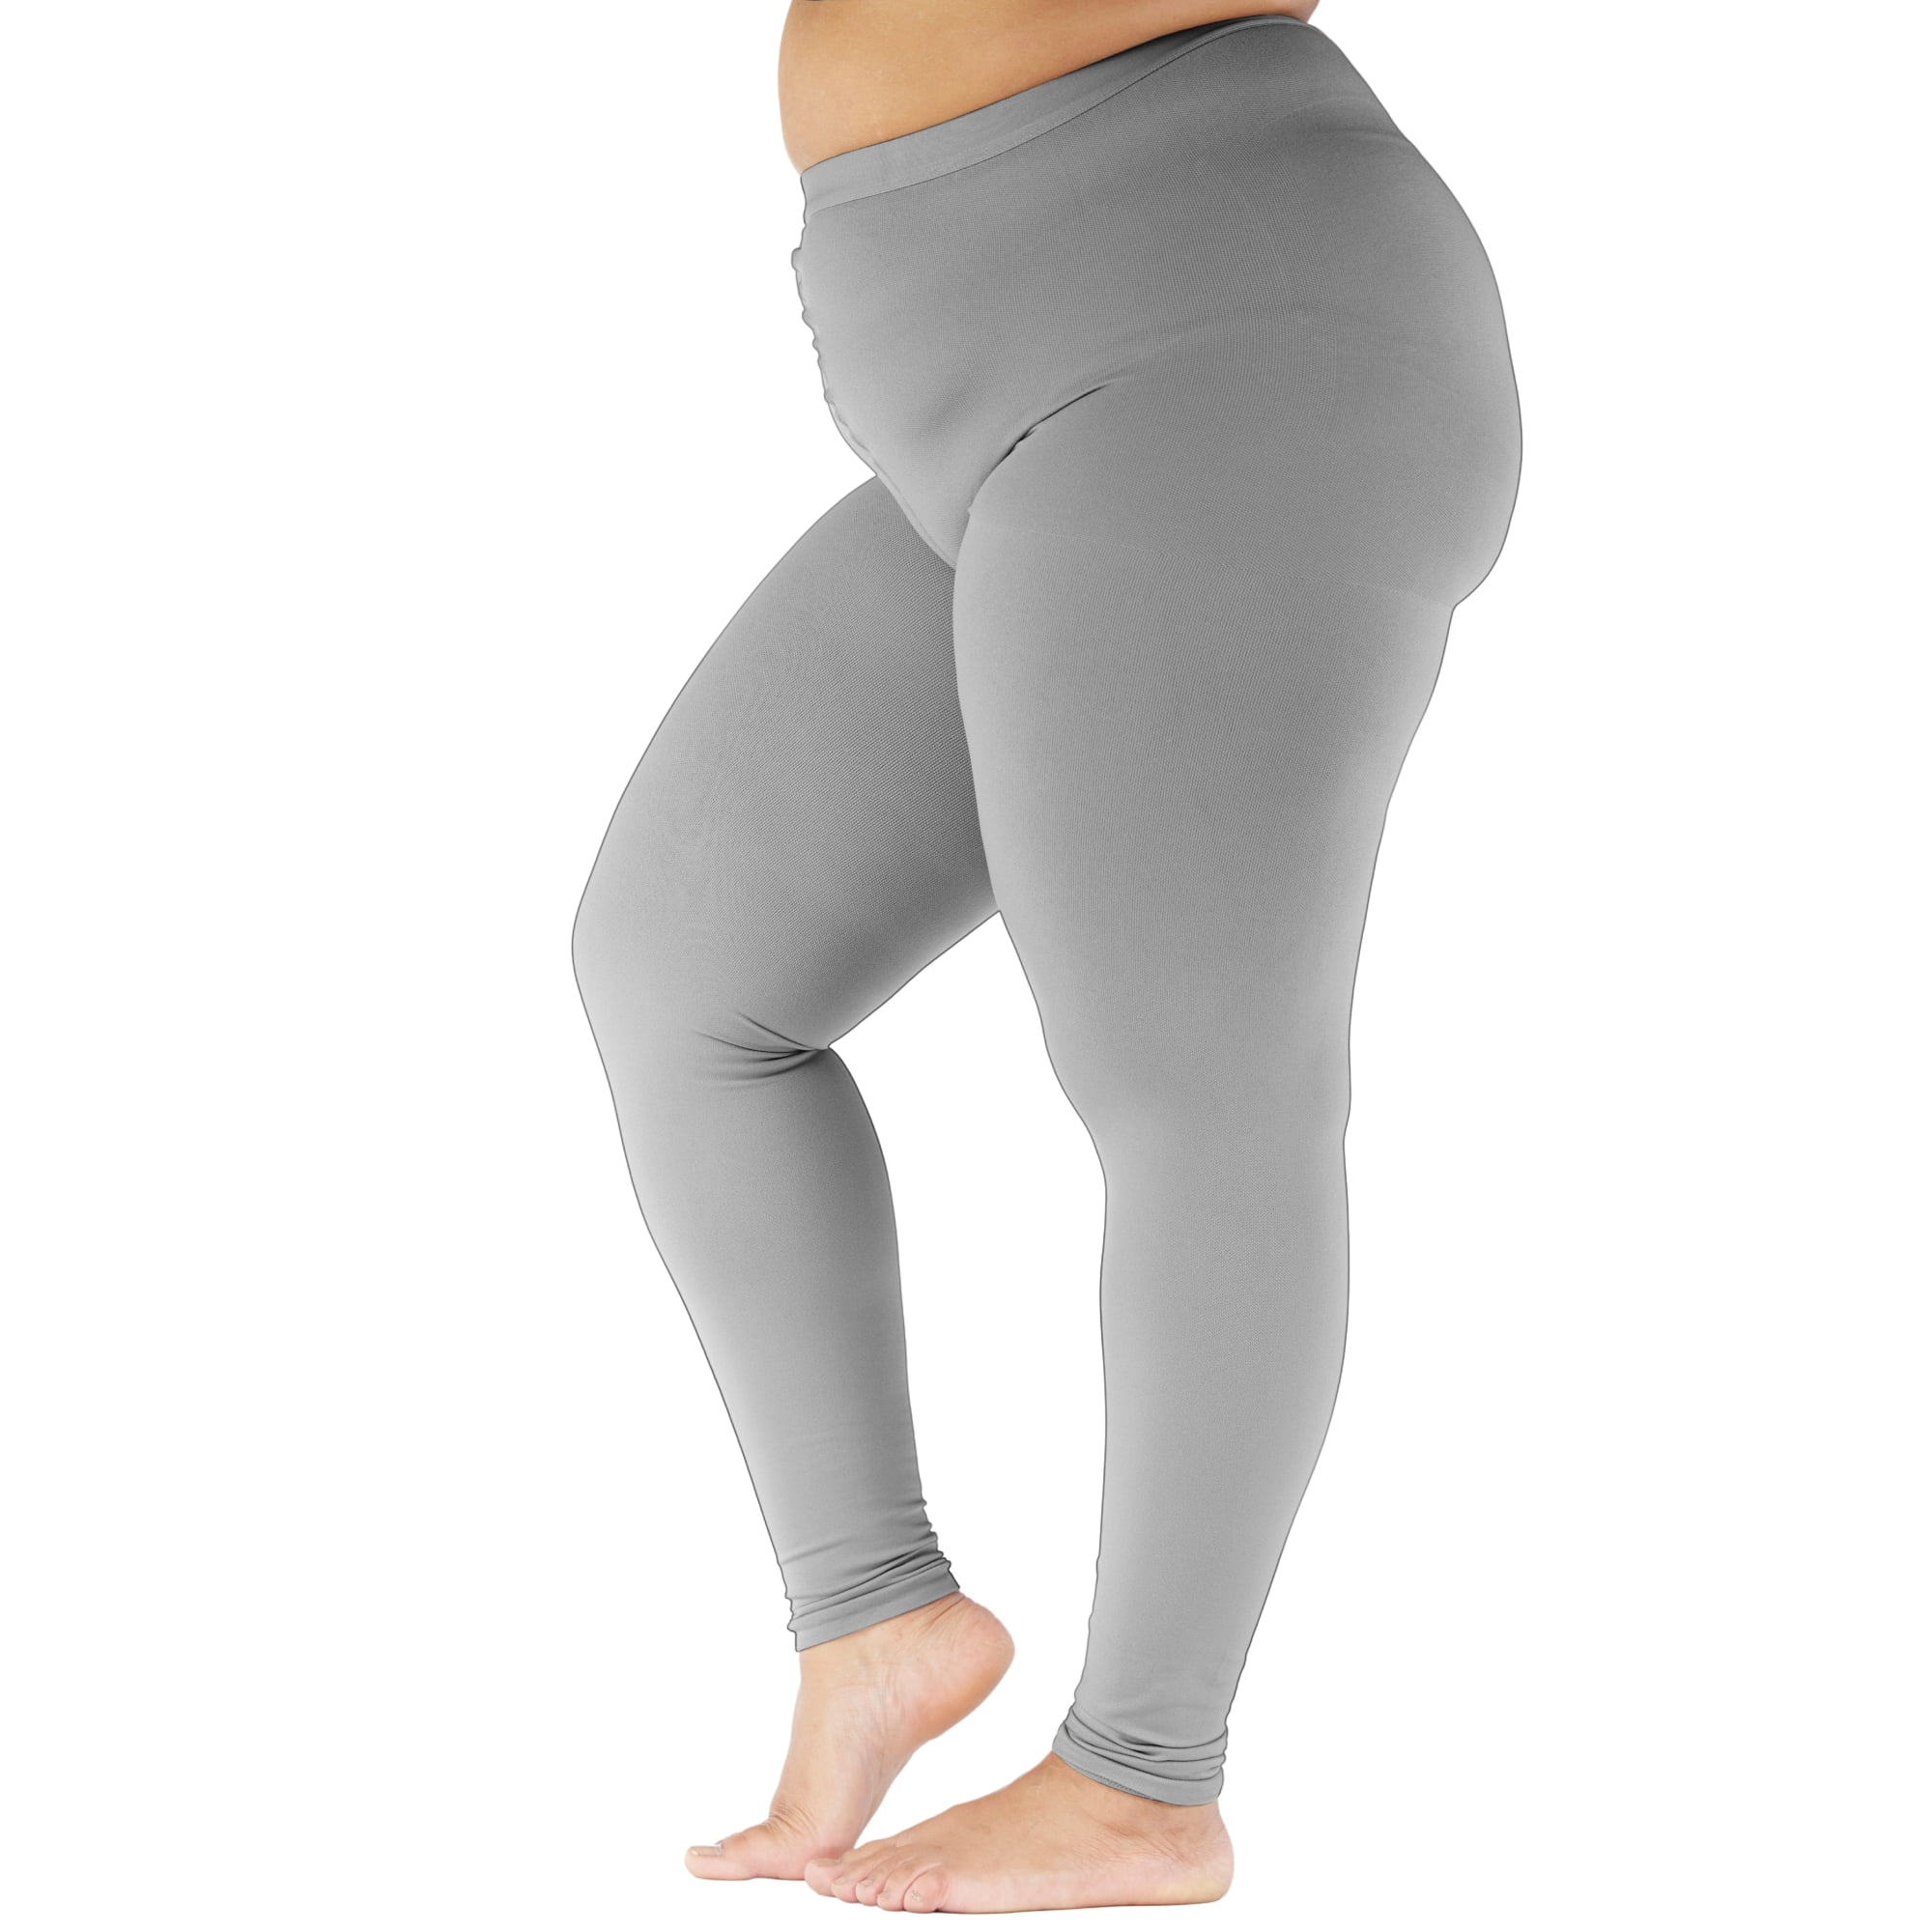 3XL Extra Wide Compression Leggings for Swelling 20-30mmHg - Grey